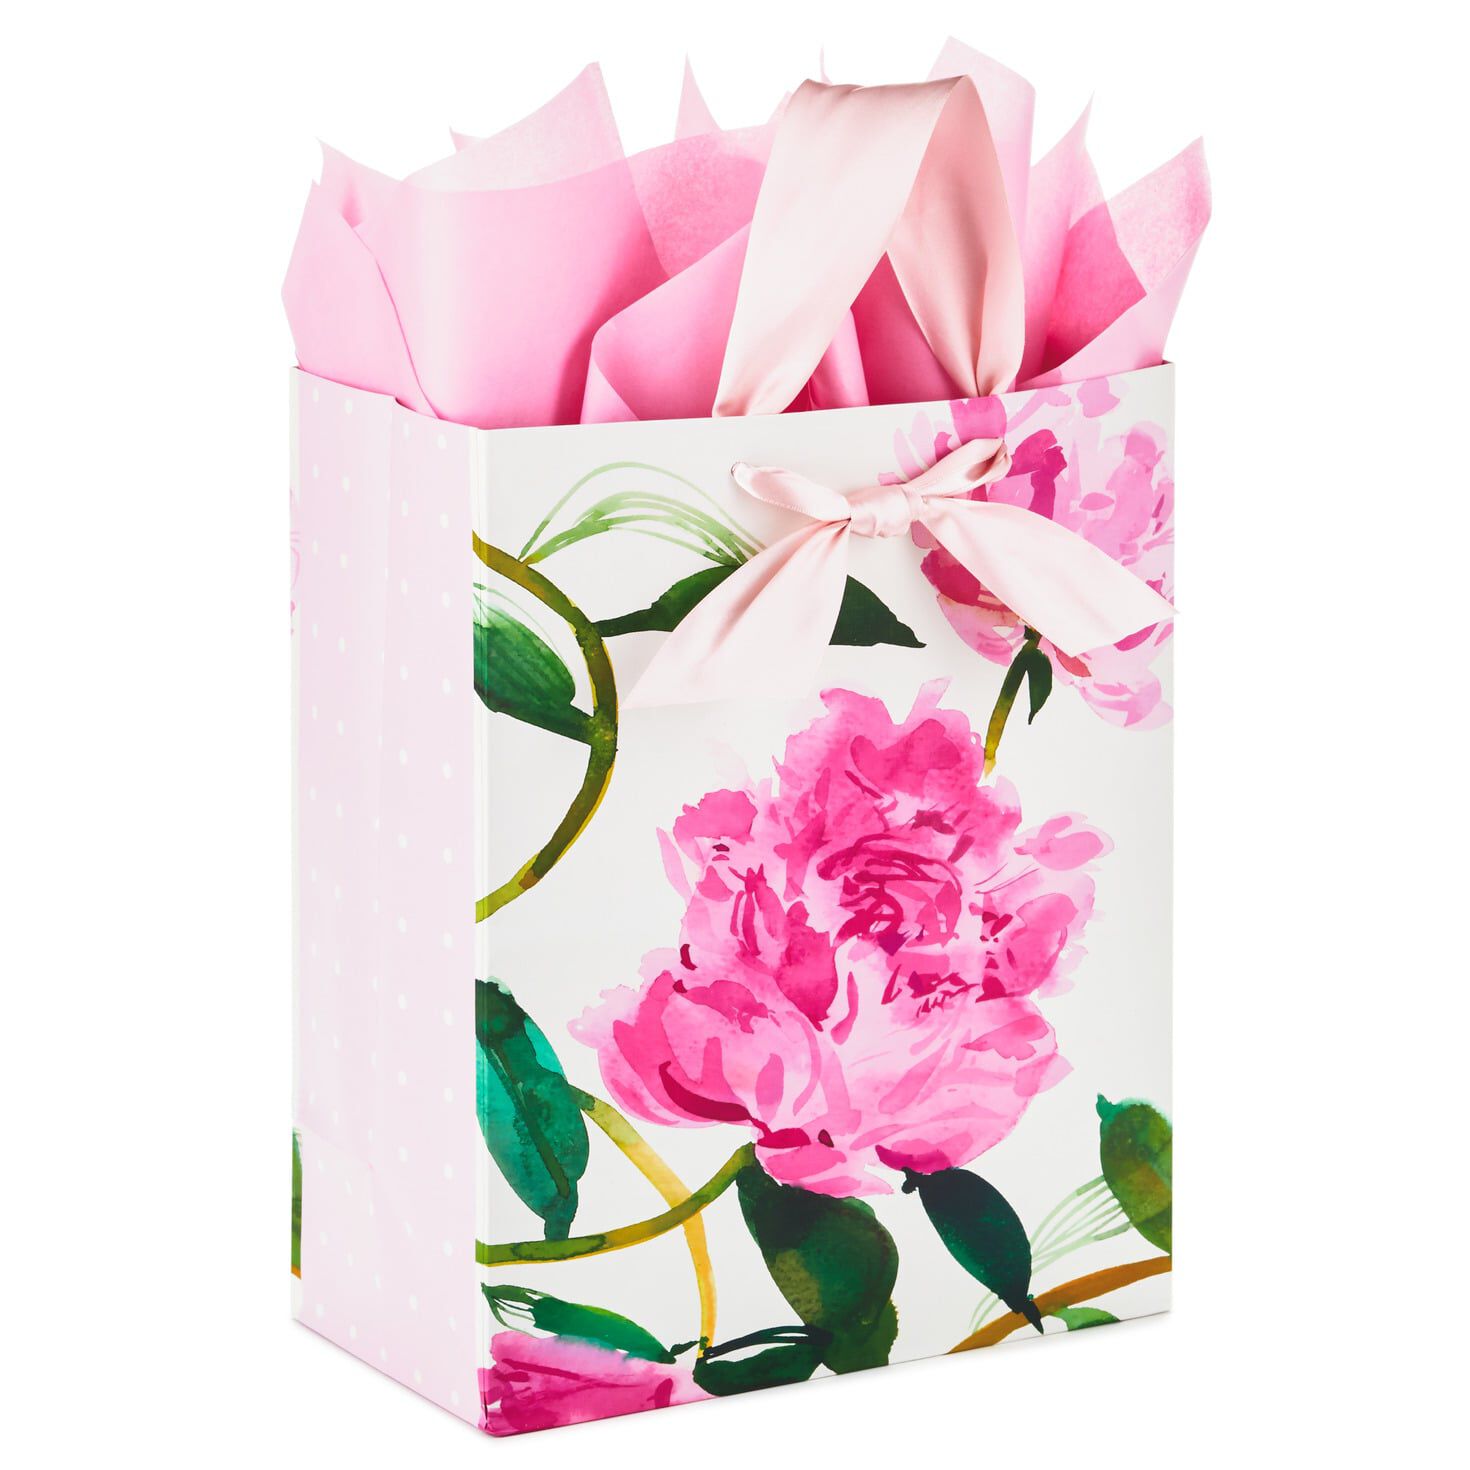 Hallmark Large Graduation Gift Bag With Tissue Paper and Gift Tag